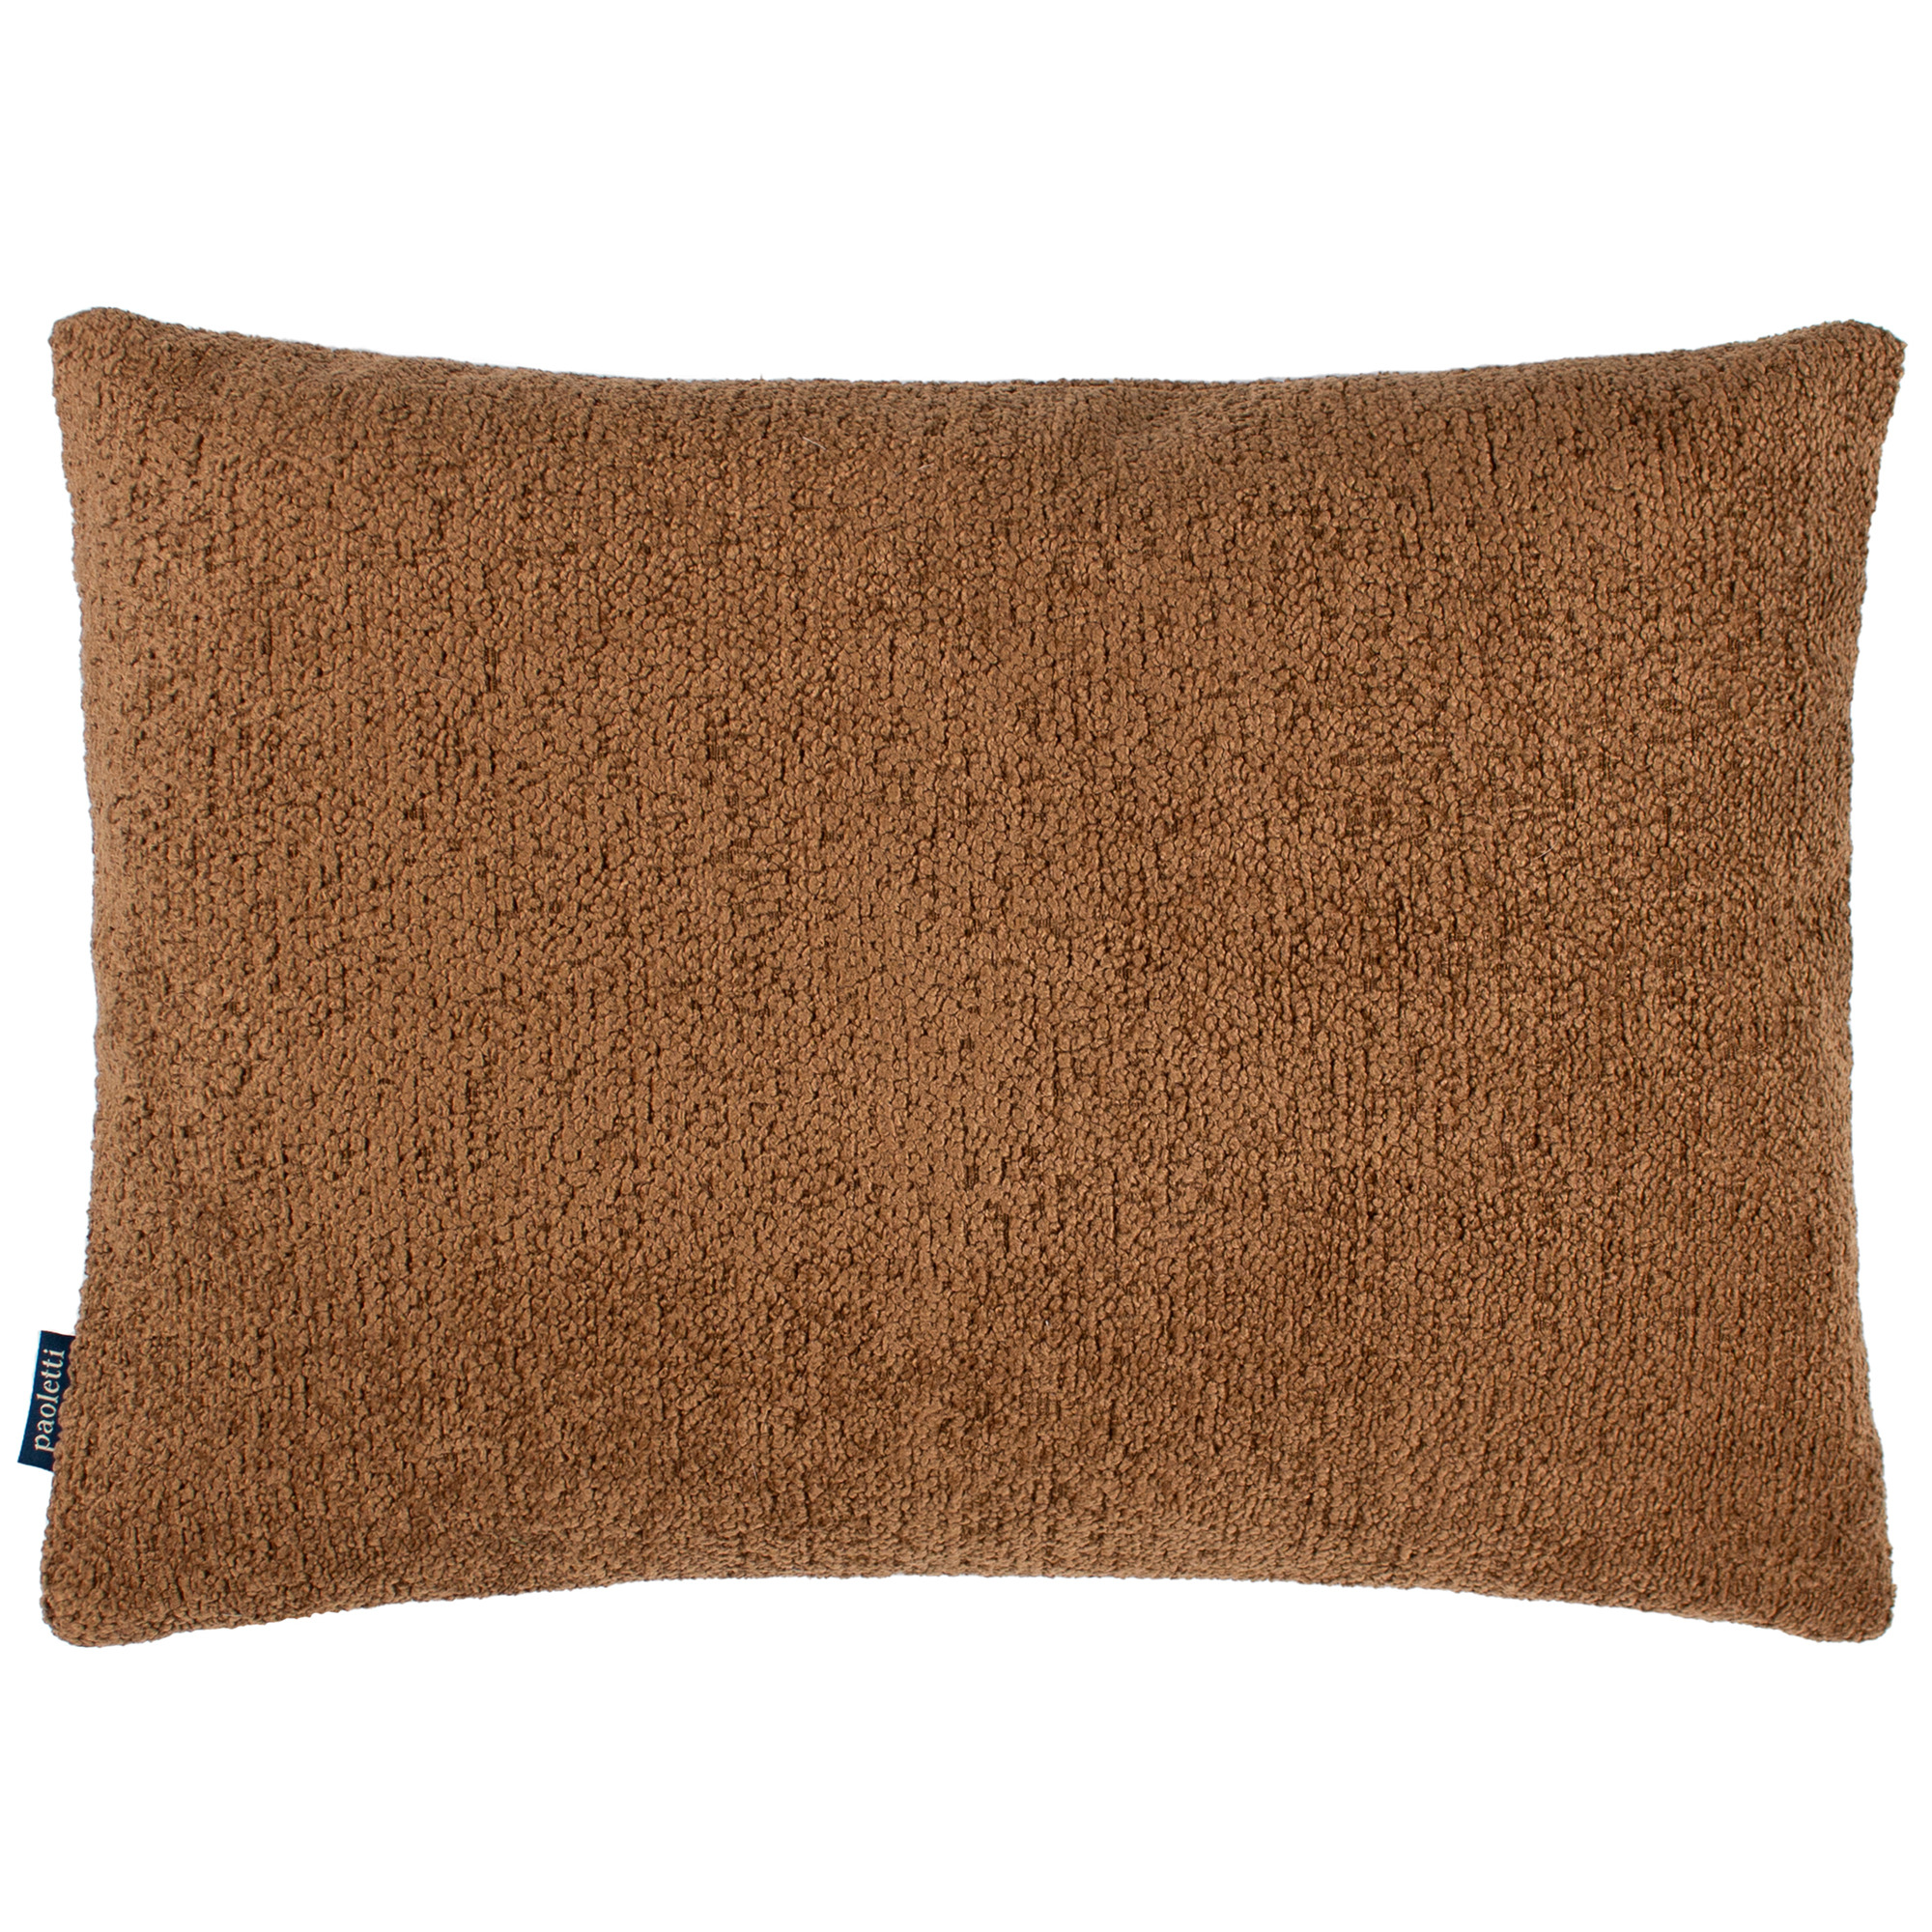 Bronze Boucle Cushion, Square, Brown - Barker & Stonehouse - image 1